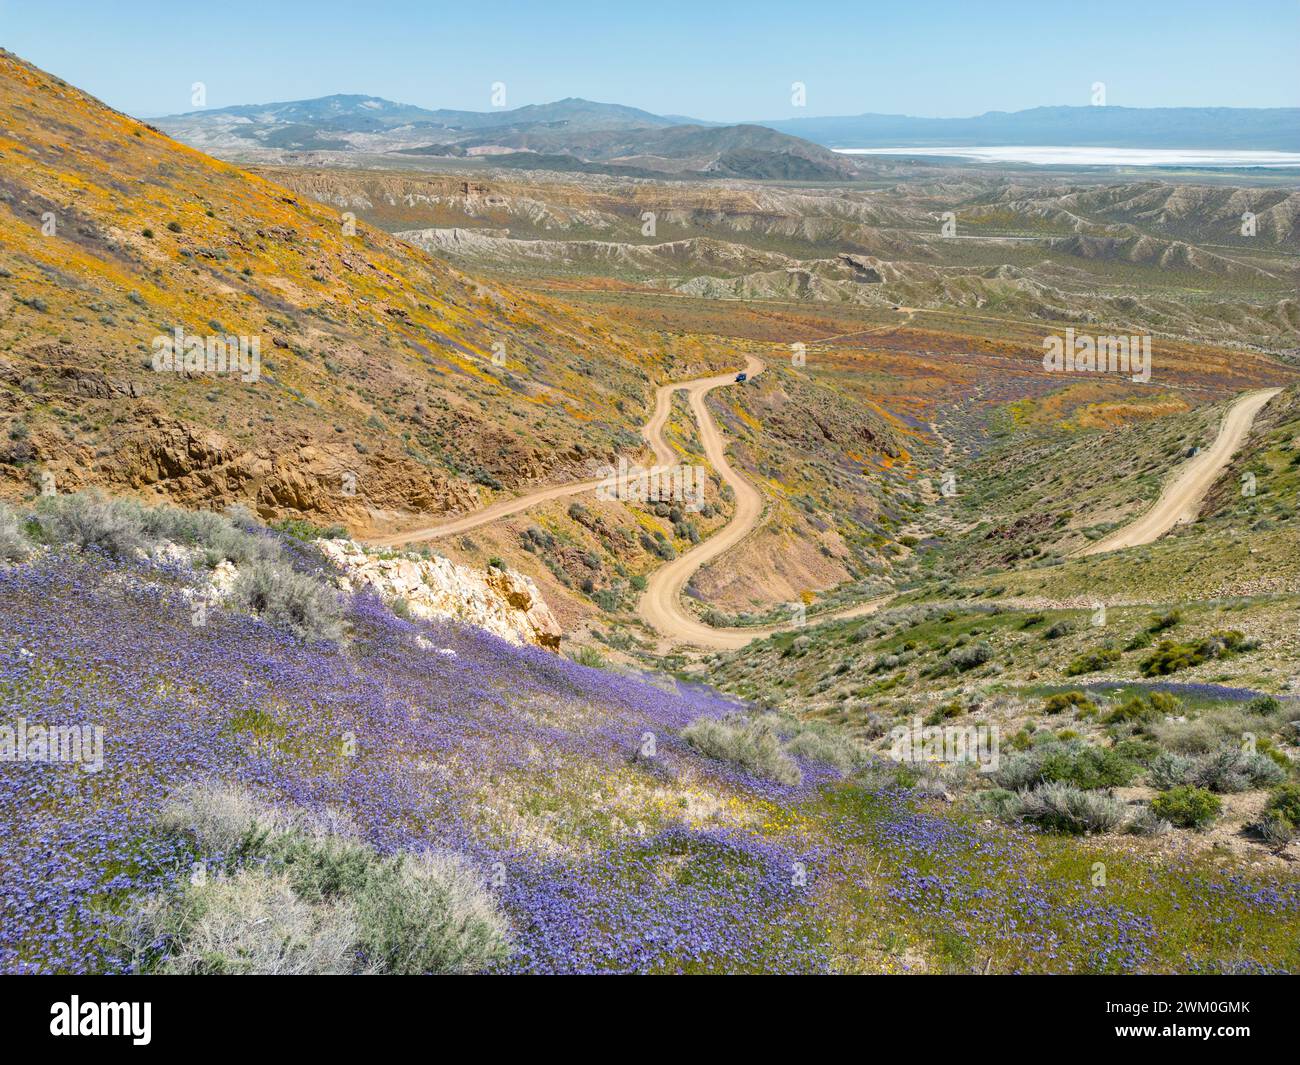 Flower fields with trail near Jawbone Canyon, located on Sugarloaf Hill, looking towards Red Rock Canyon. Overlooking Mojave Desert Stock Photo